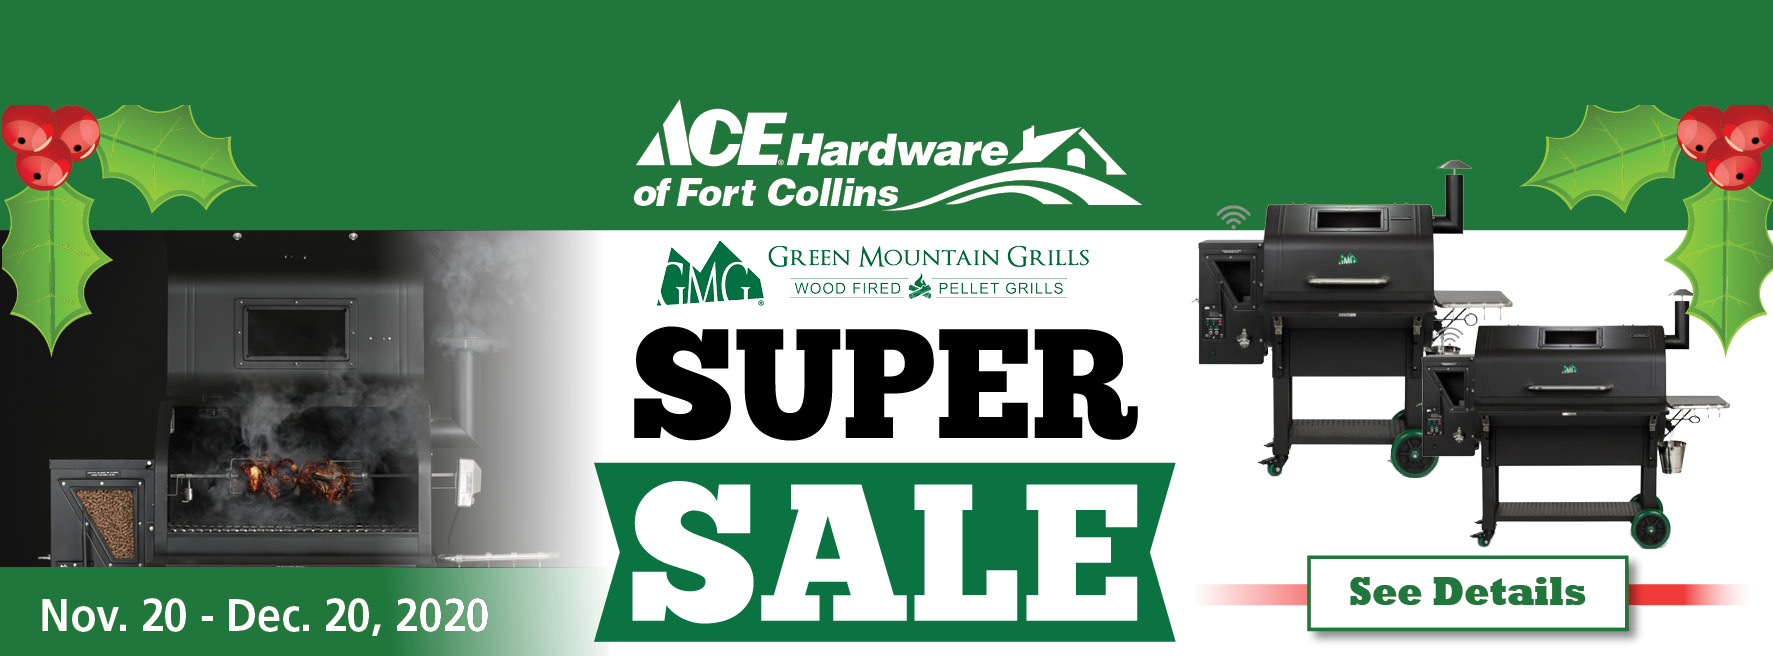 Green Mountain Grill Sale Ace Hardware of Fort Collins